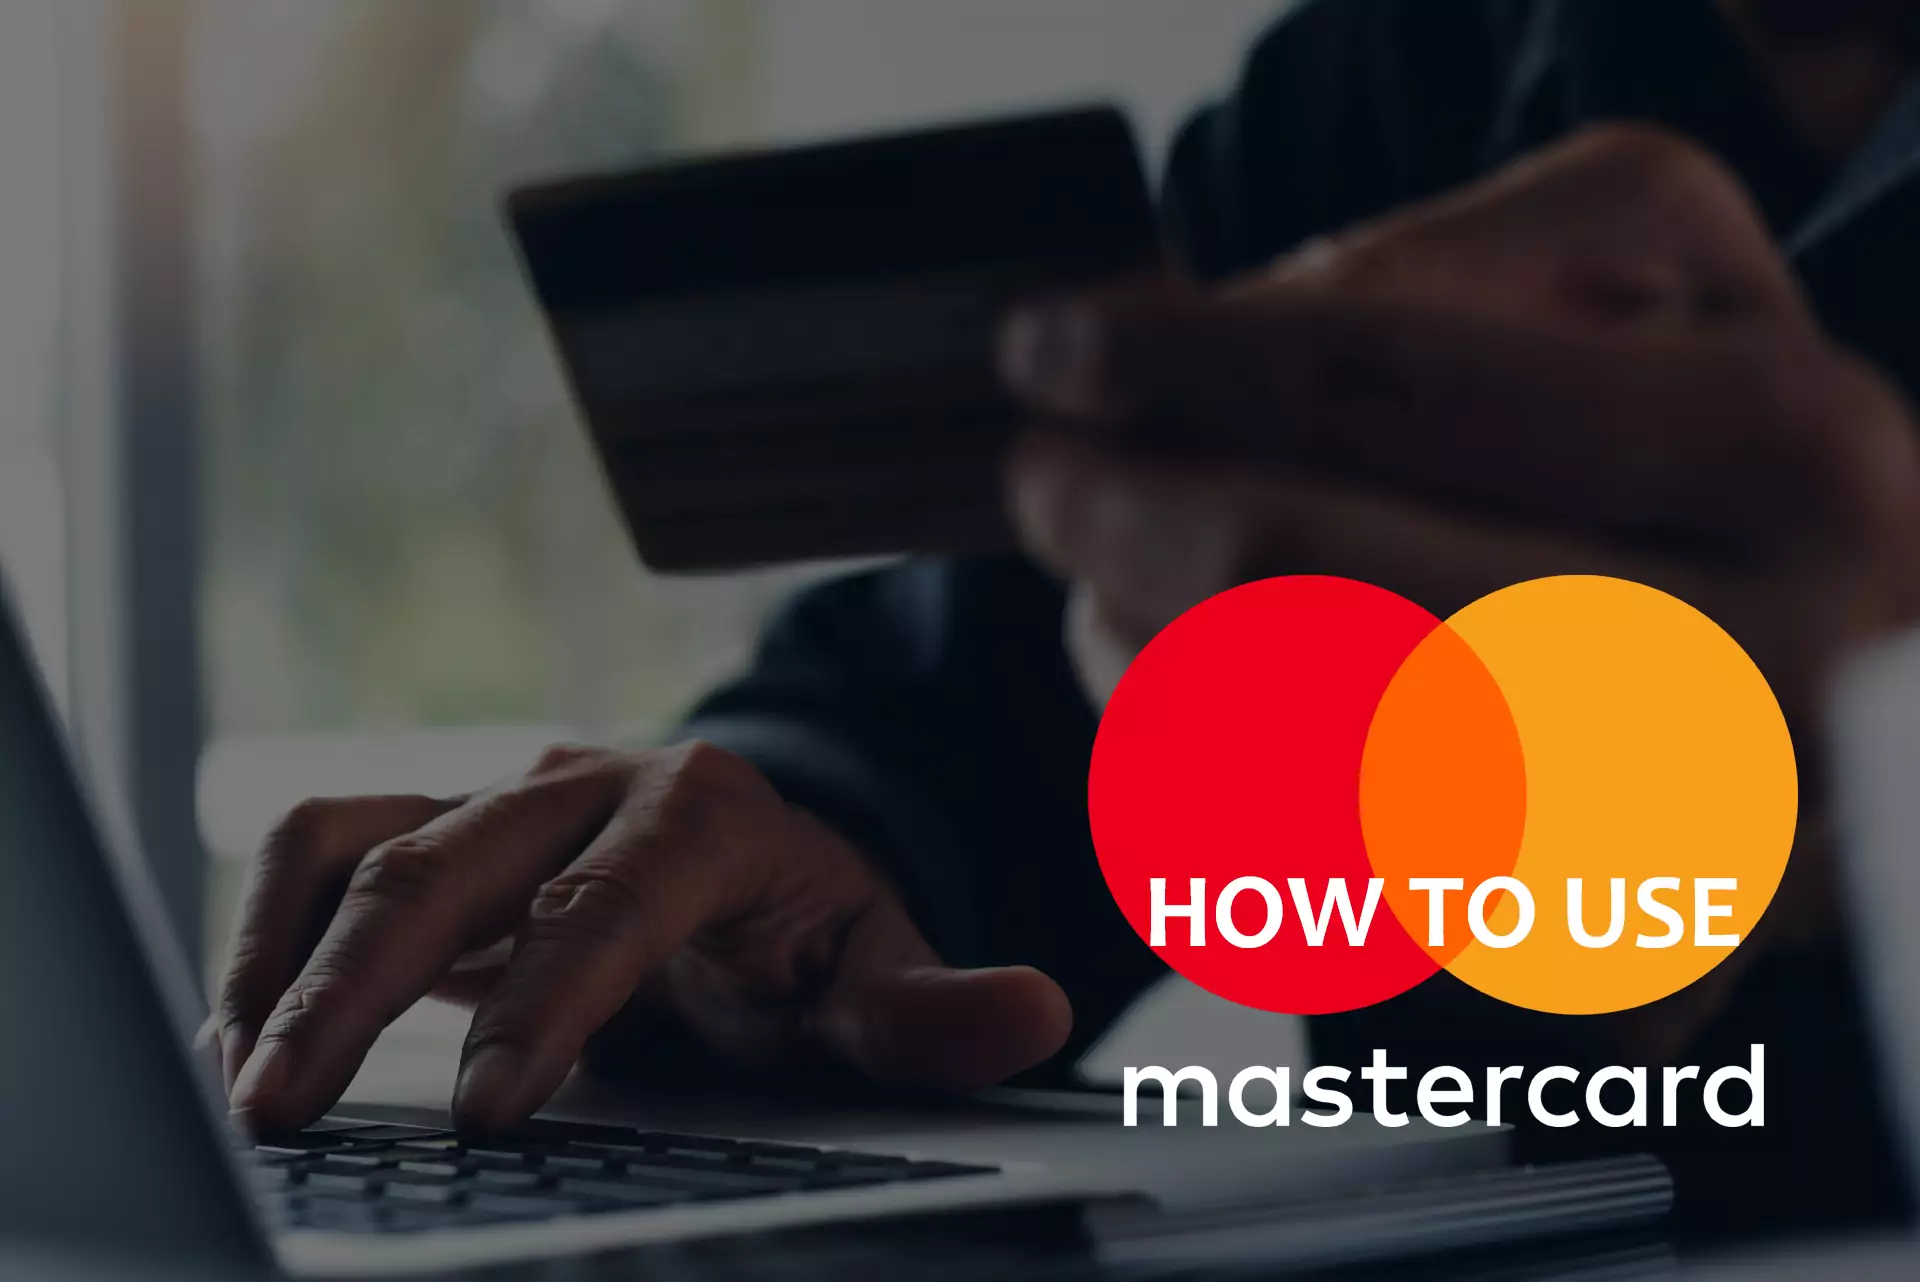 You have to create a betting account before deposit using MasterCard.